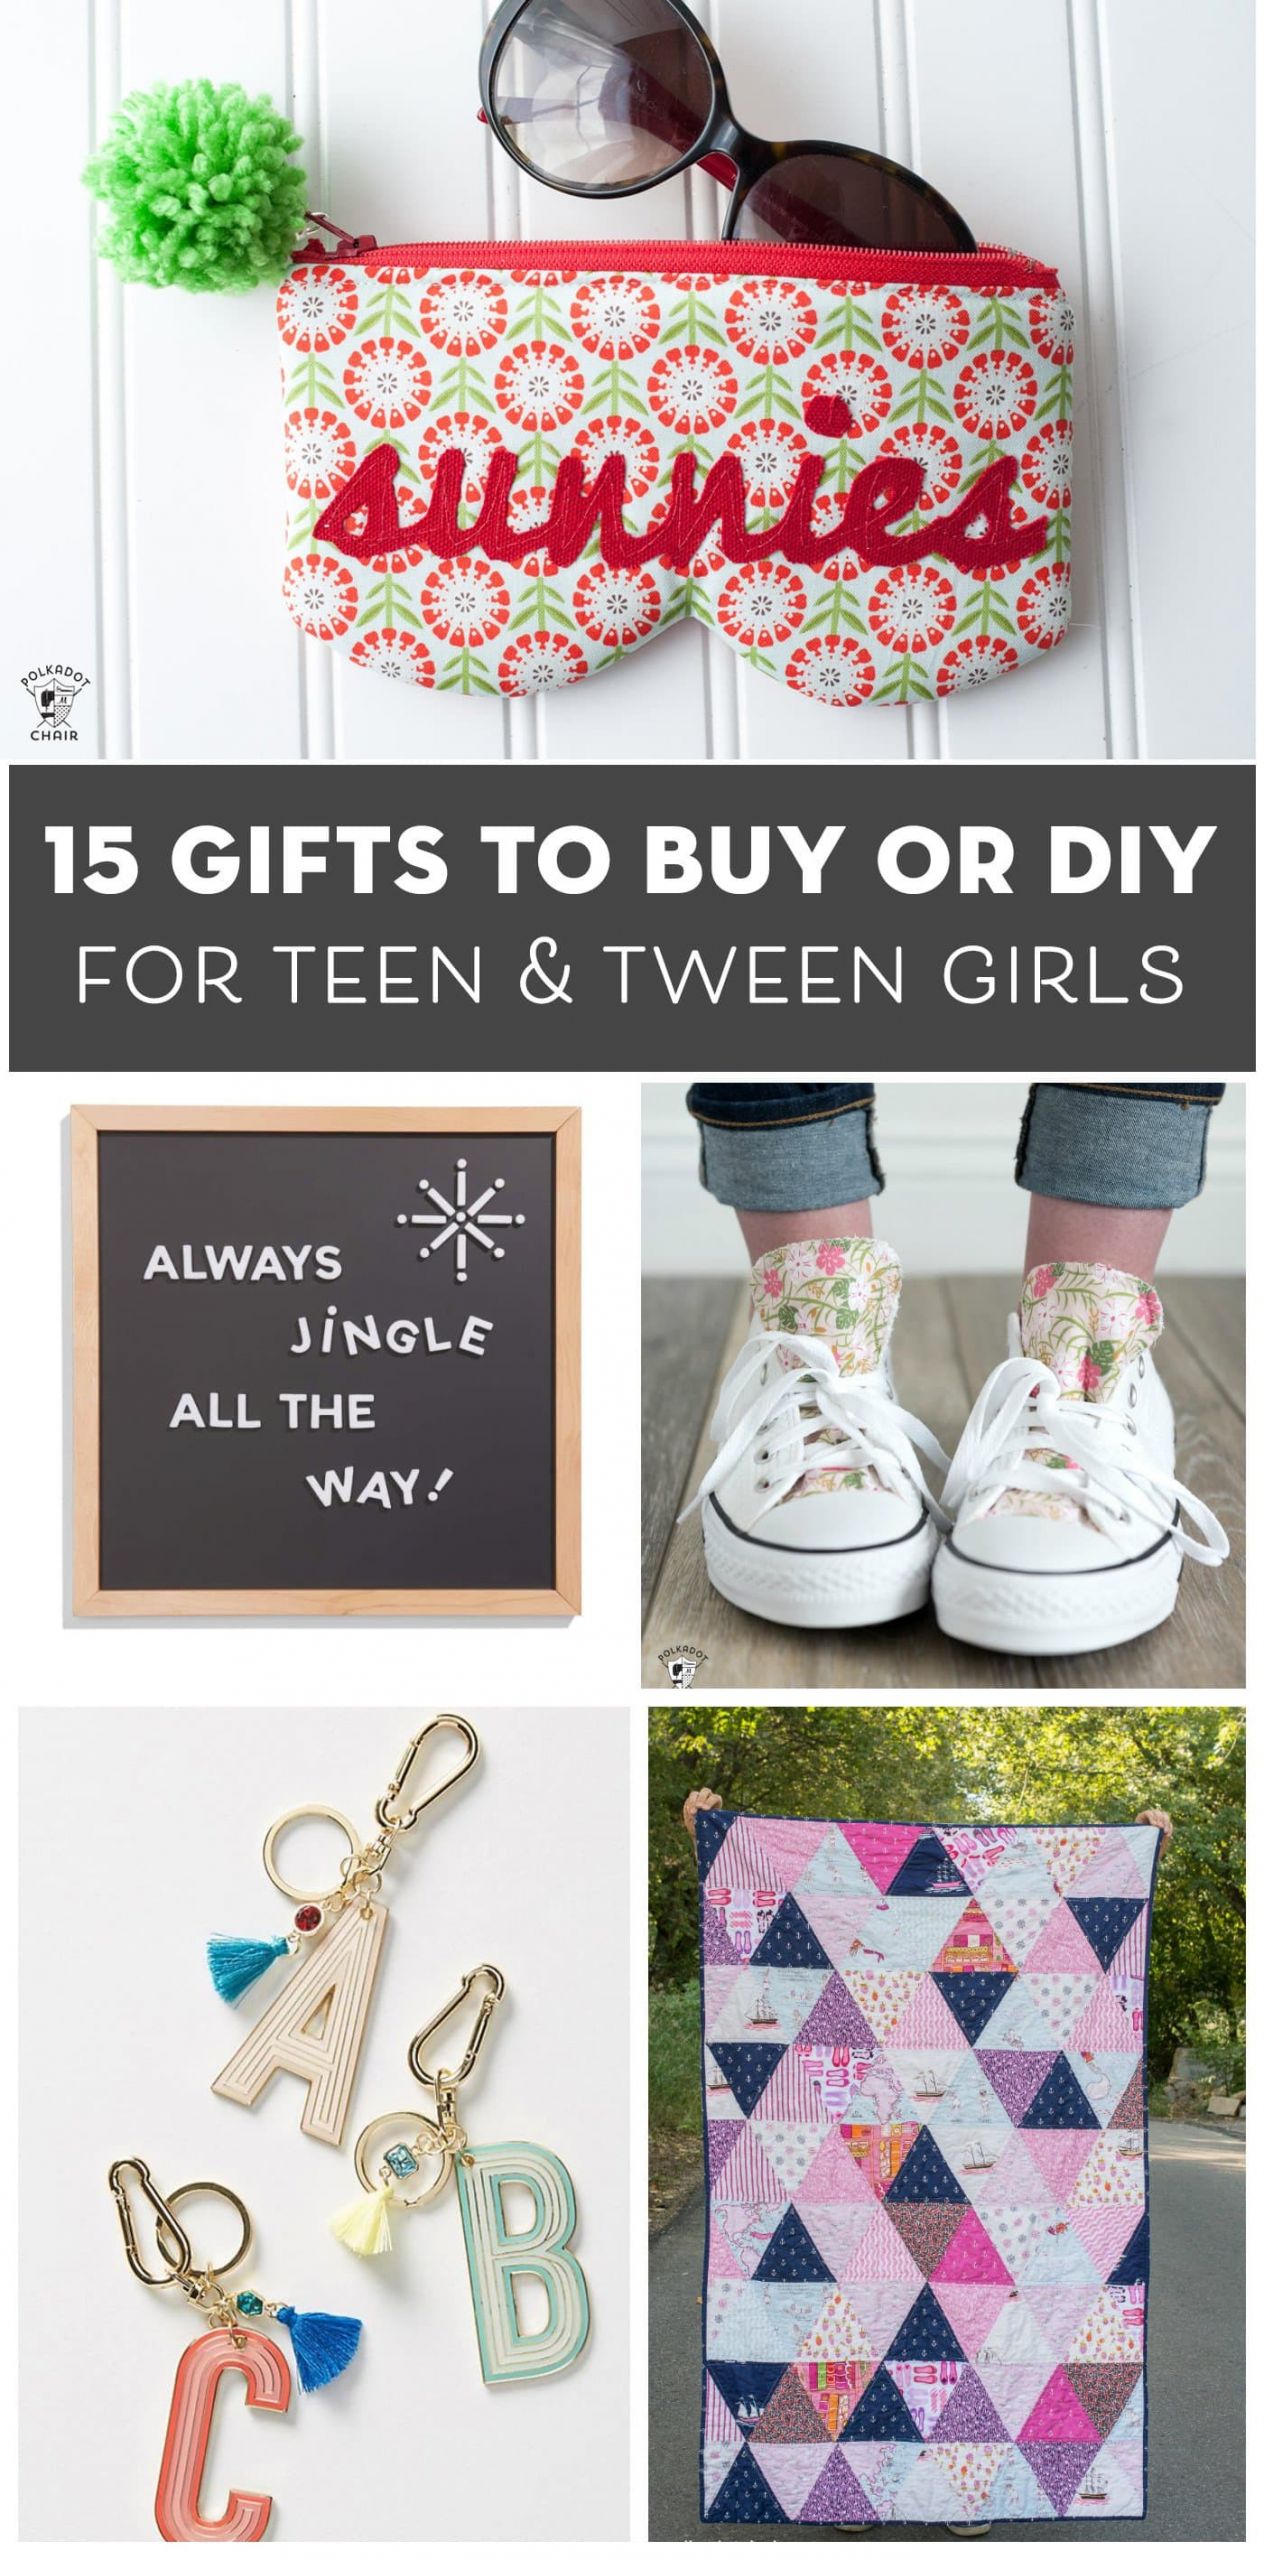 Teenage Gift Ideas Girls
 15 Gift Ideas for Teenage Girls That You Can DIY or Buy